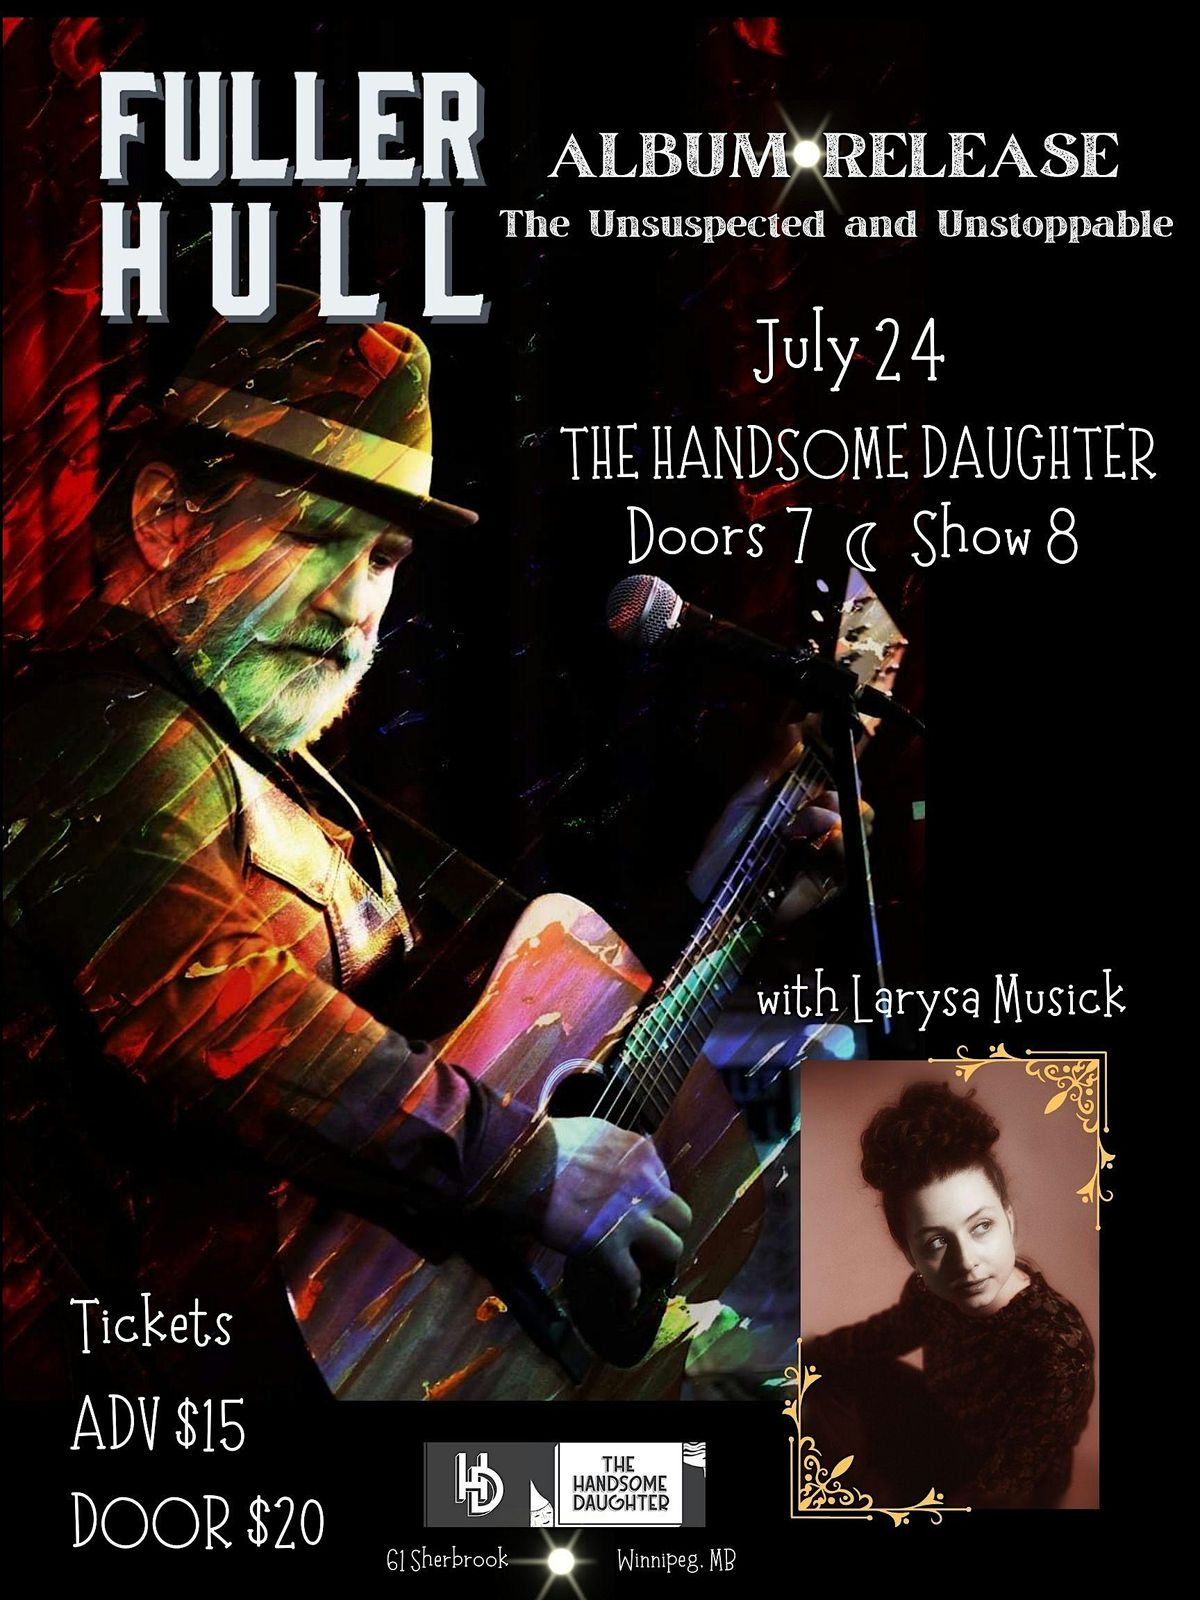 Fuller Hull  - Album Release  - "The Unsuspected and Unstoppable"